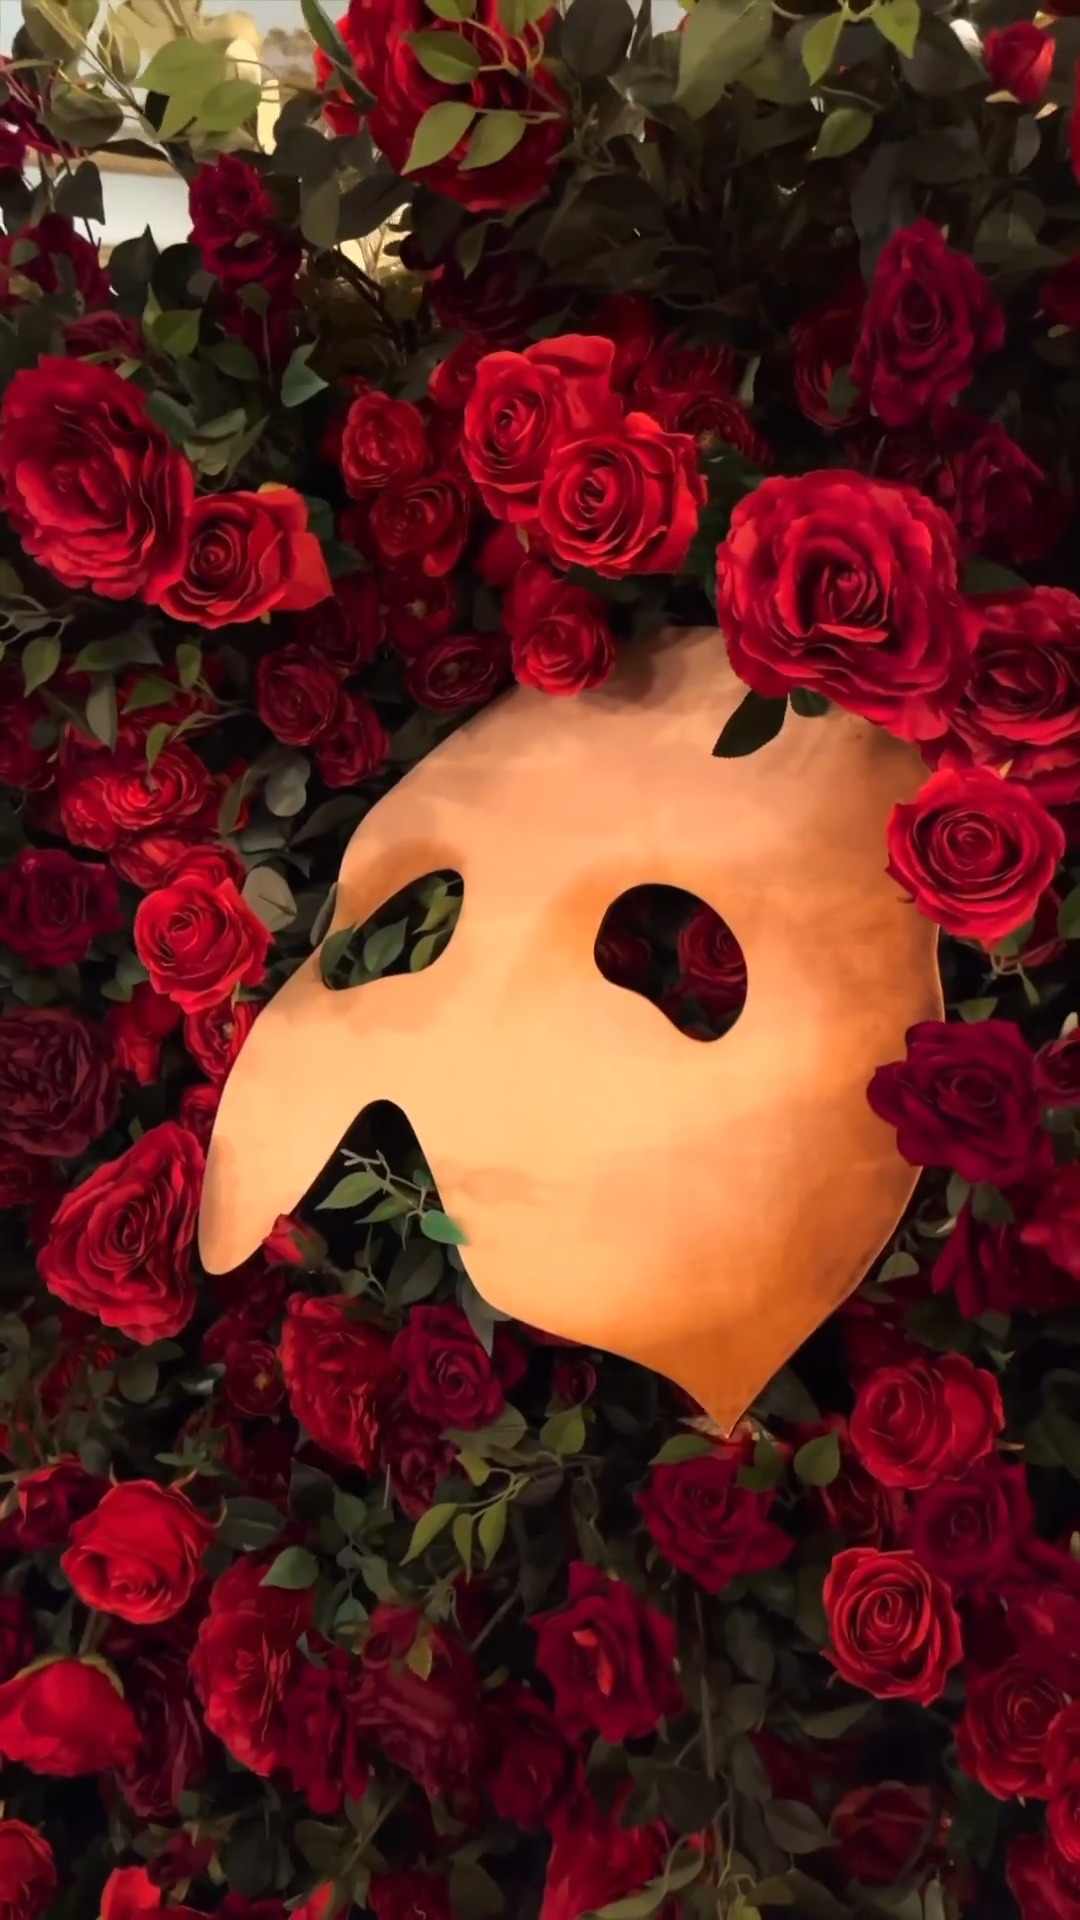 stories give life meaning  phantom of the opera wallpaper like or reblog  if